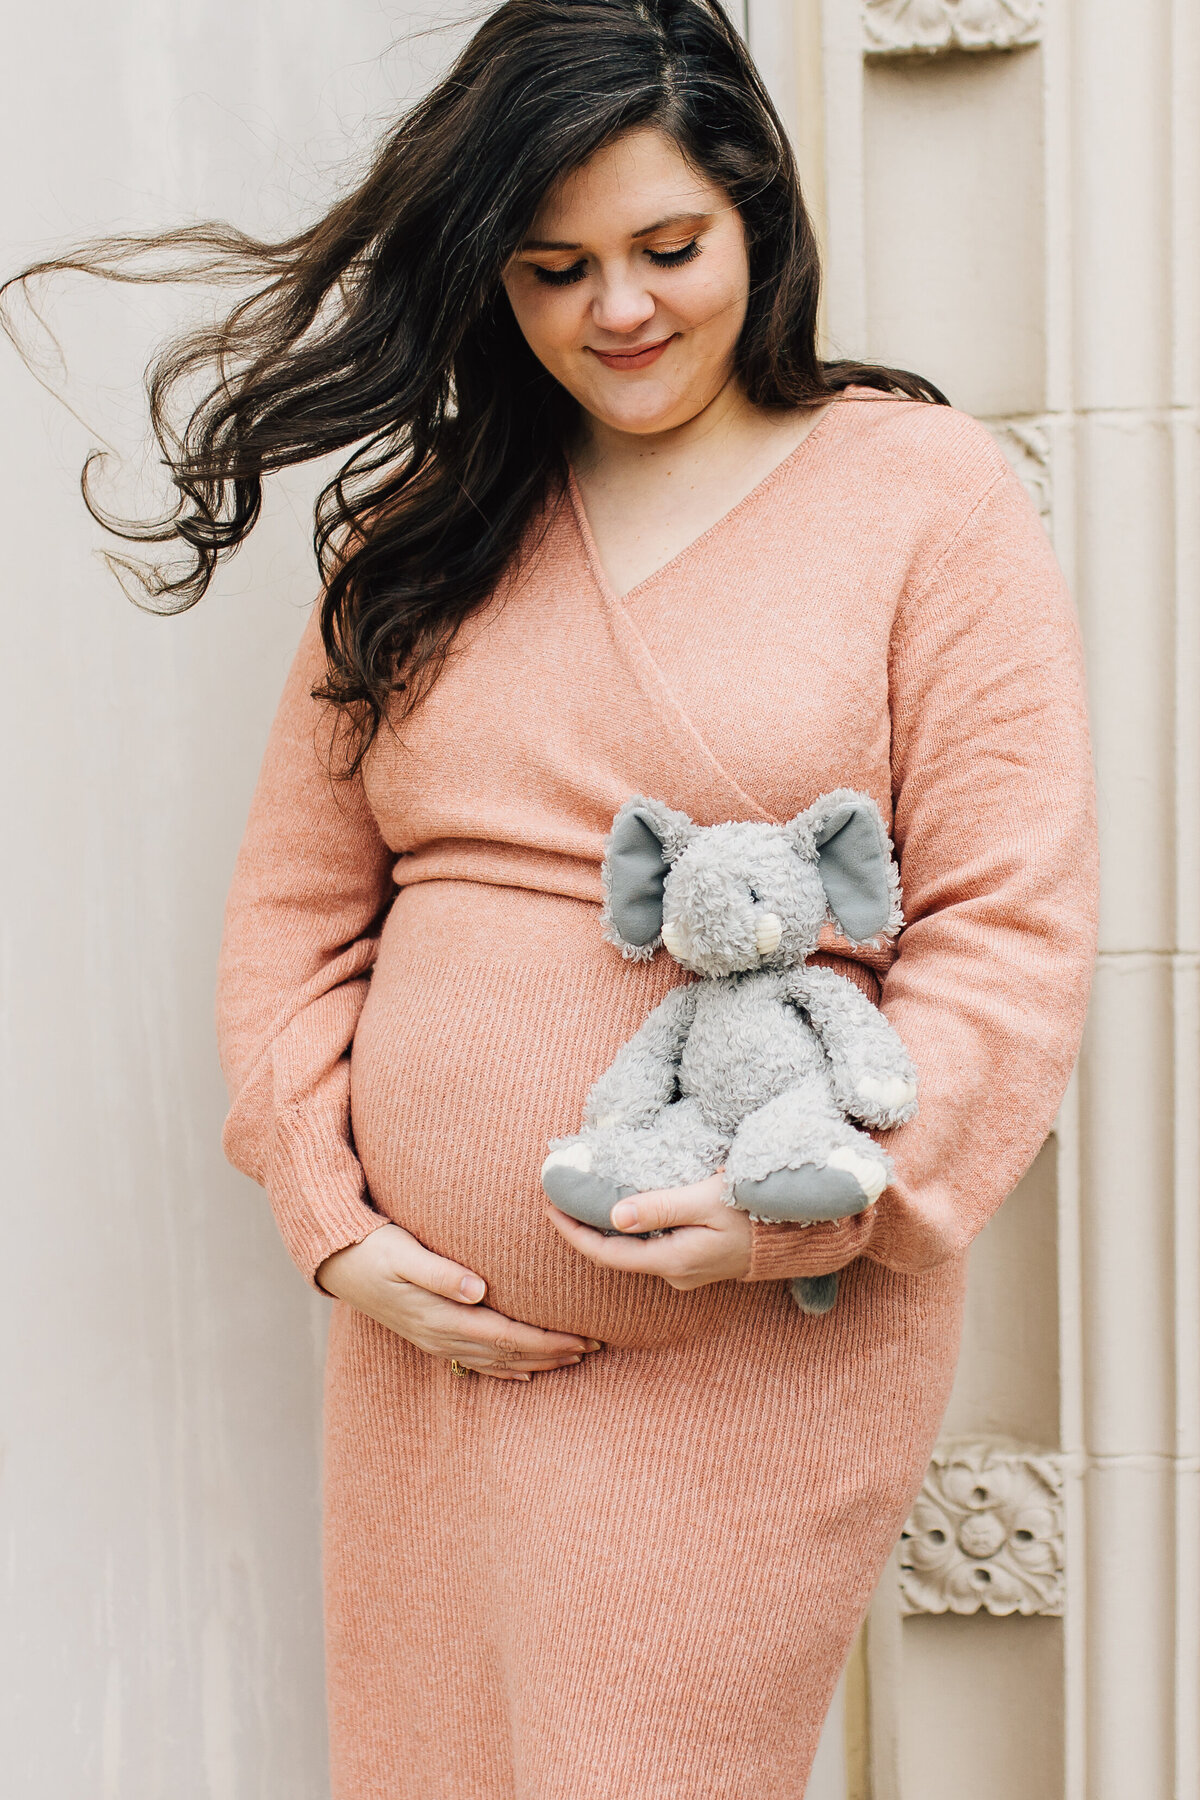 Pregnant woman smiles while holding her baby and a stuffed animal